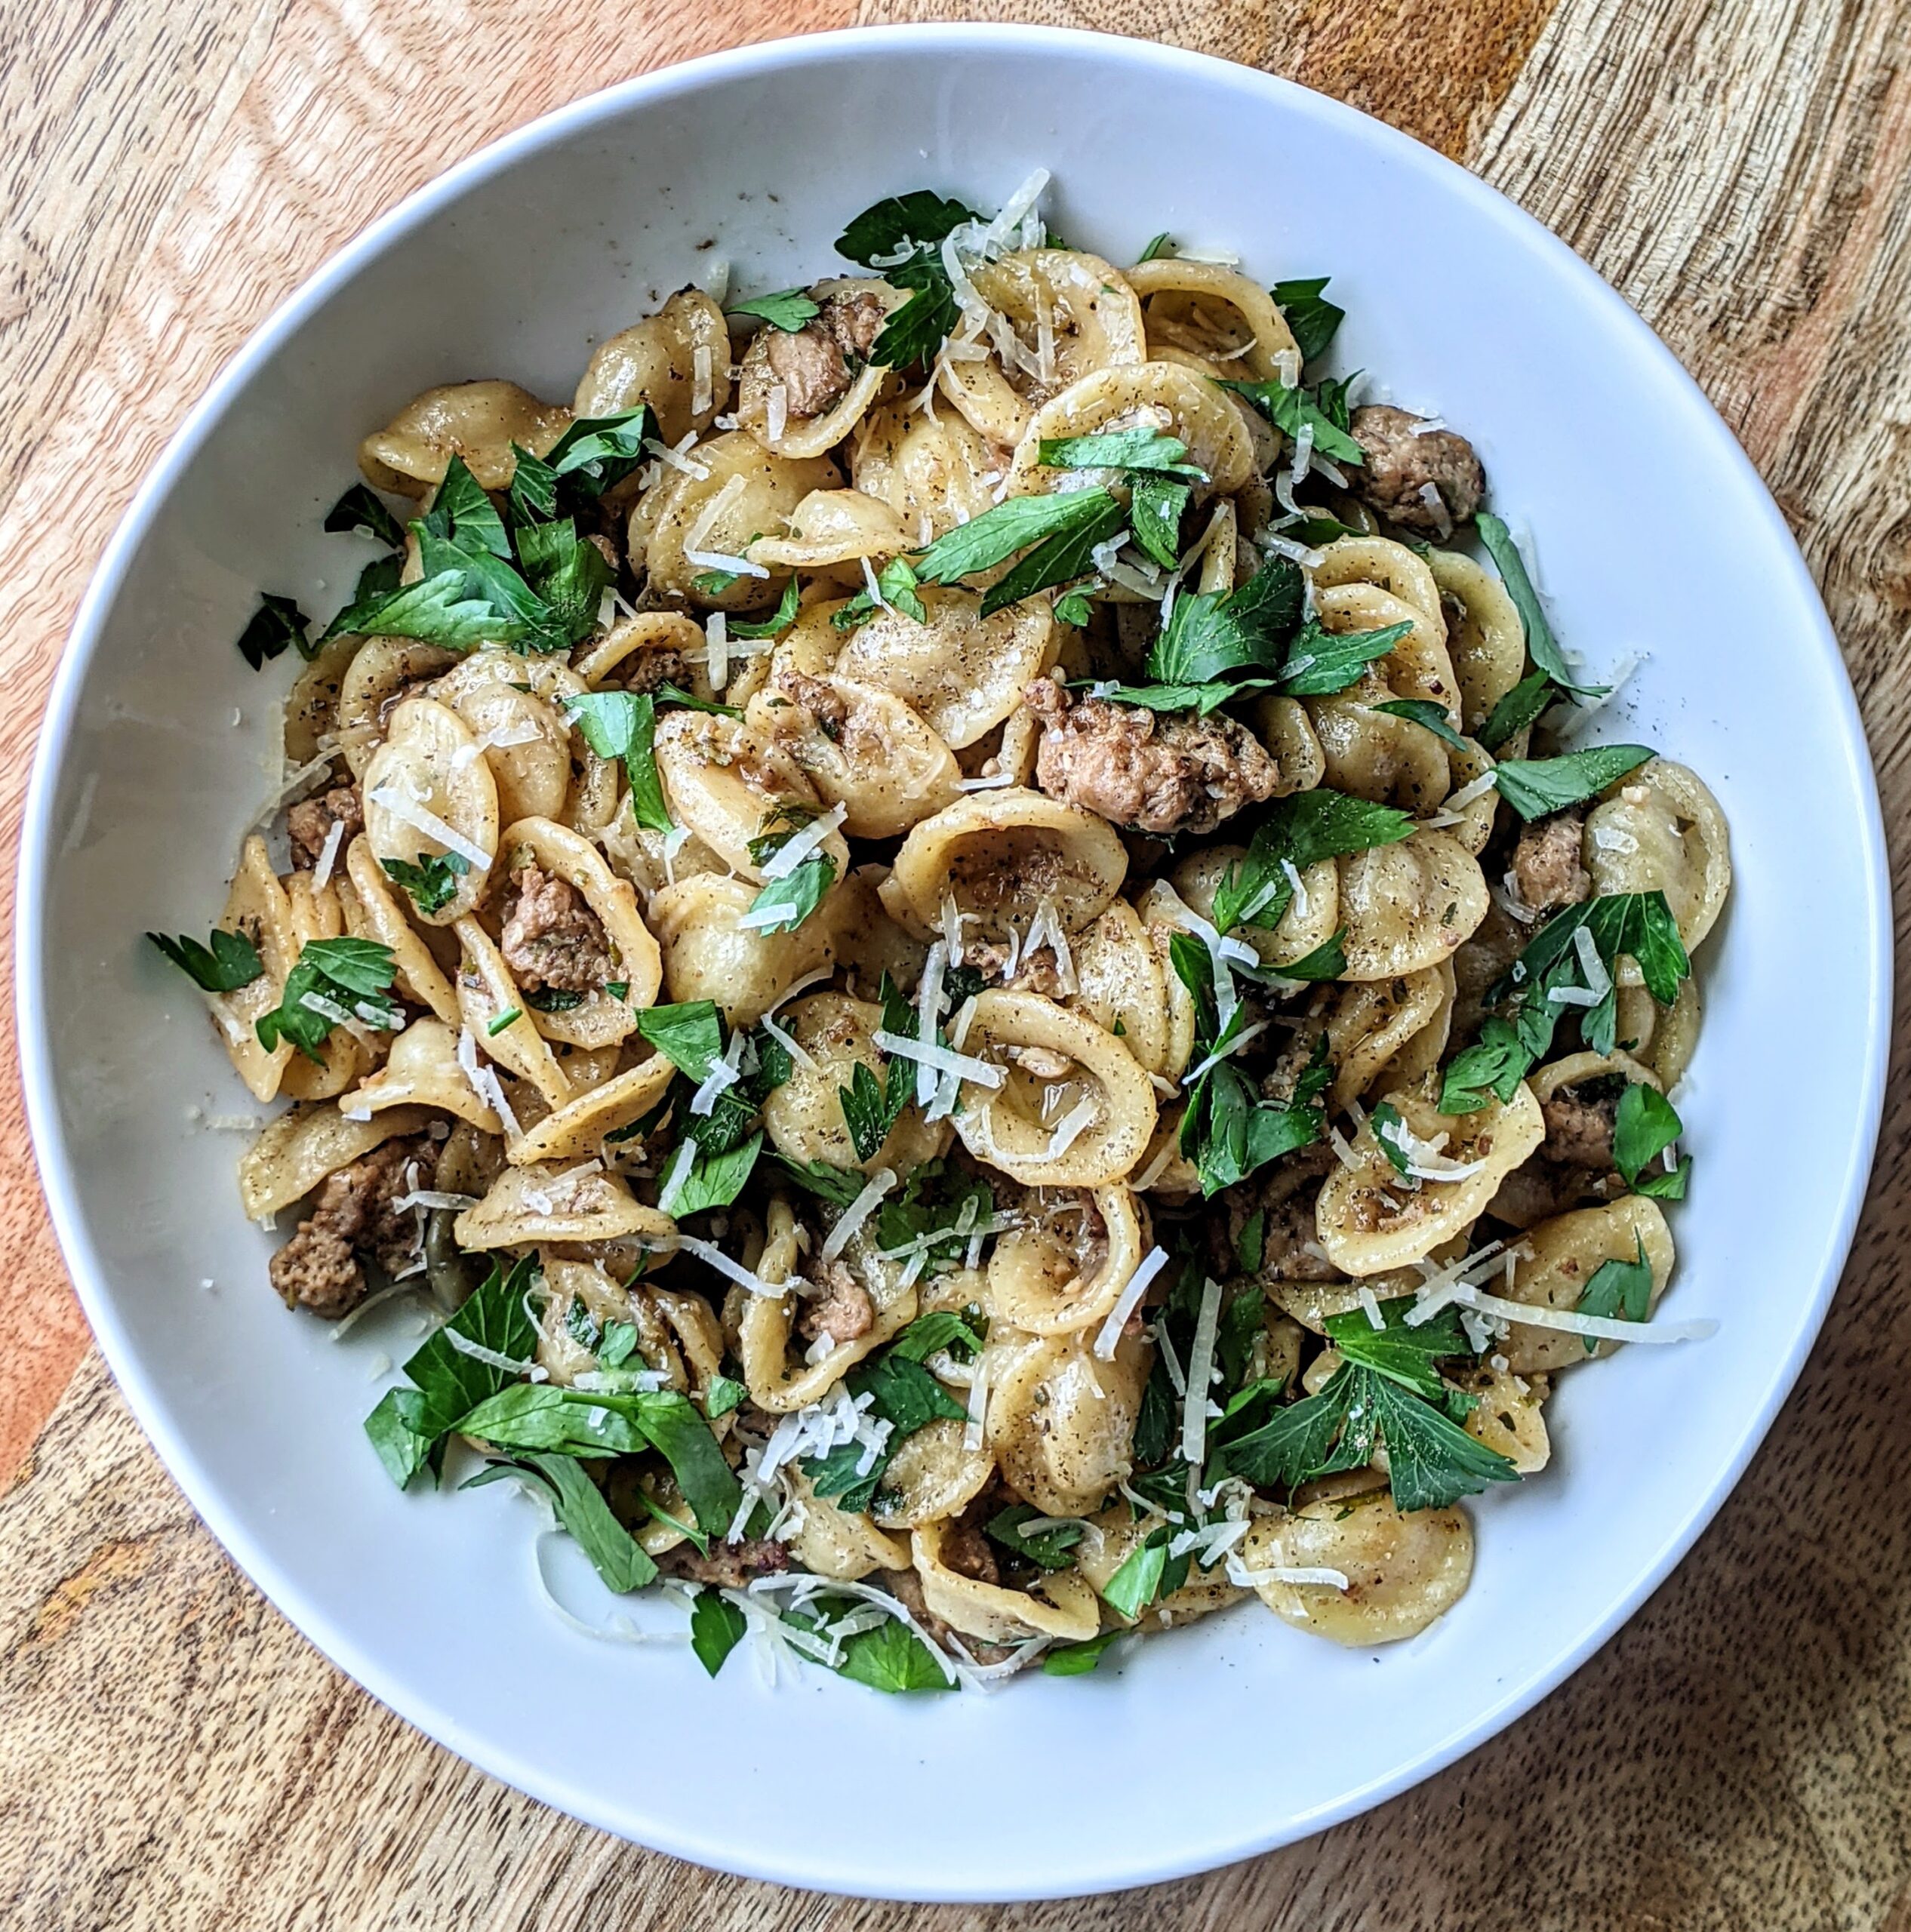 A bowl of orecchiette tossed in a hearty turkey ragu. The fresh rosemary and thyme lend a holiday like flavor to this pasta dish. Topped with fresh parsley and finely grated Parmigiano Reggiano cheese.